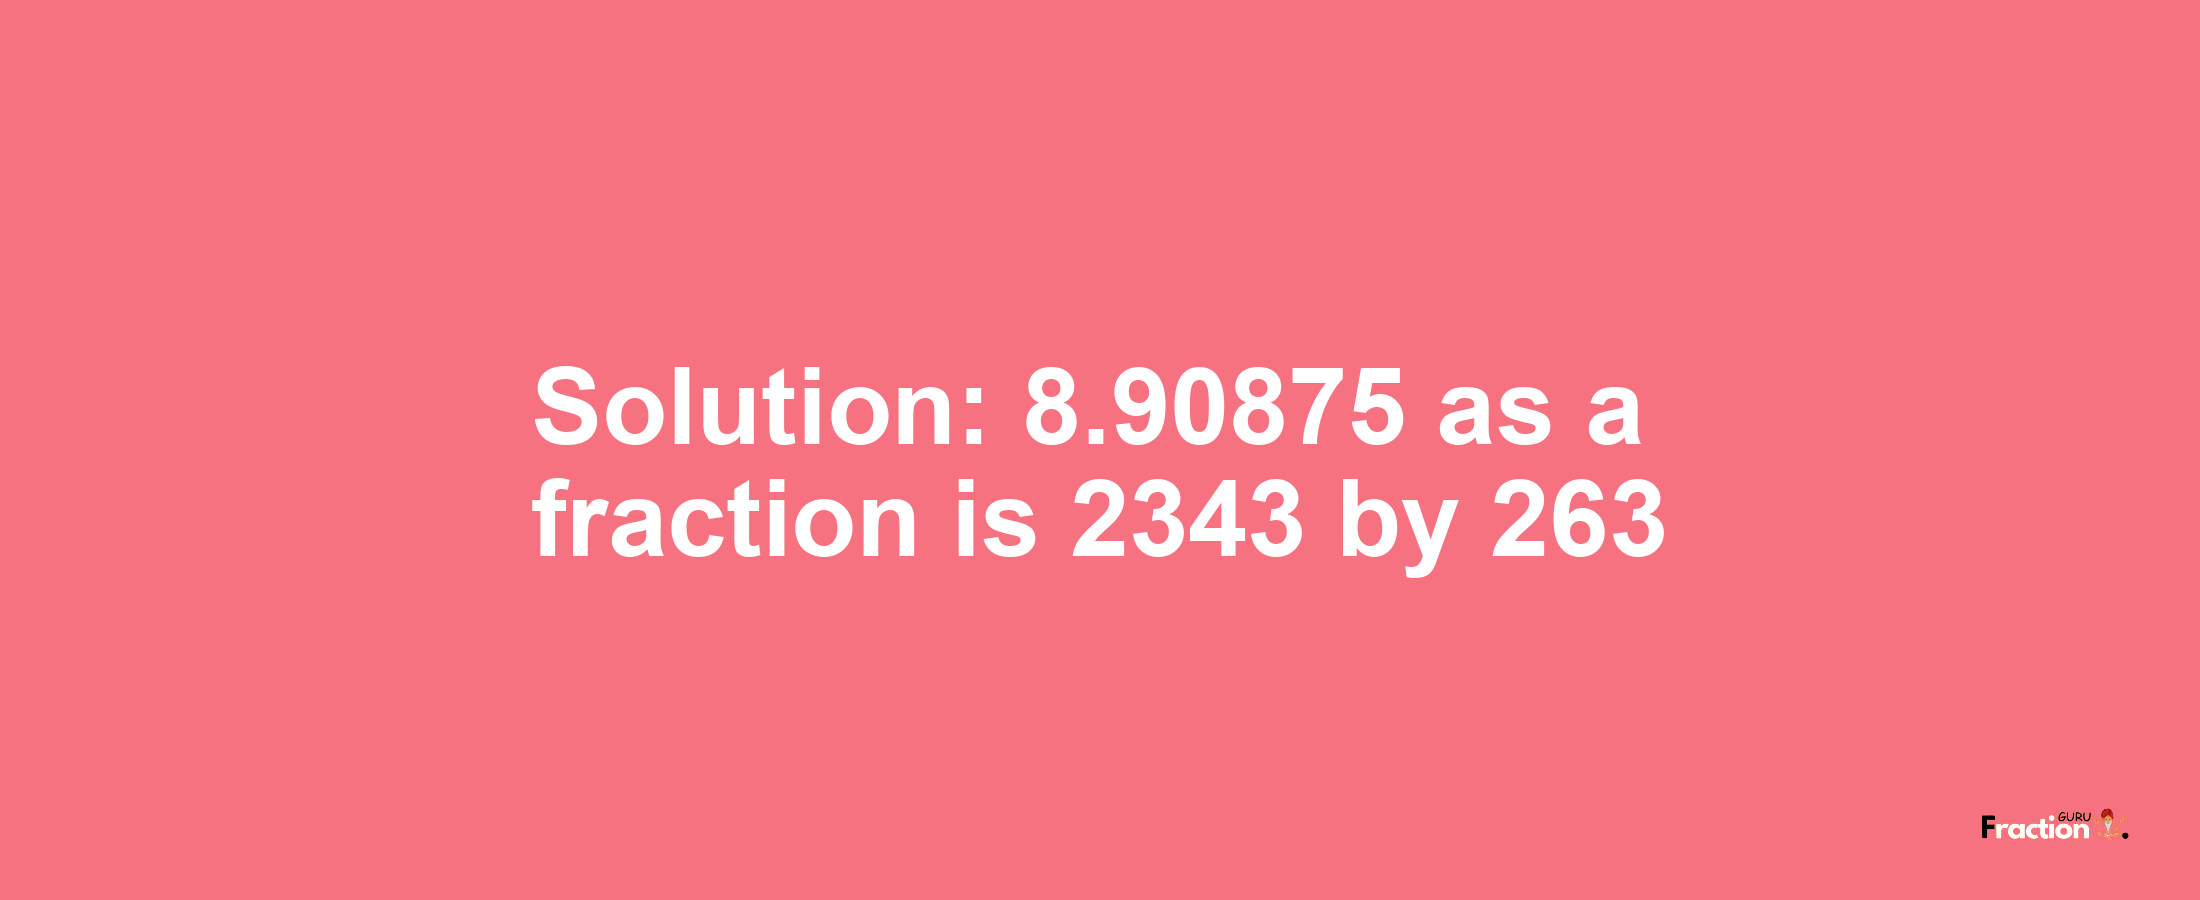 Solution:8.90875 as a fraction is 2343/263